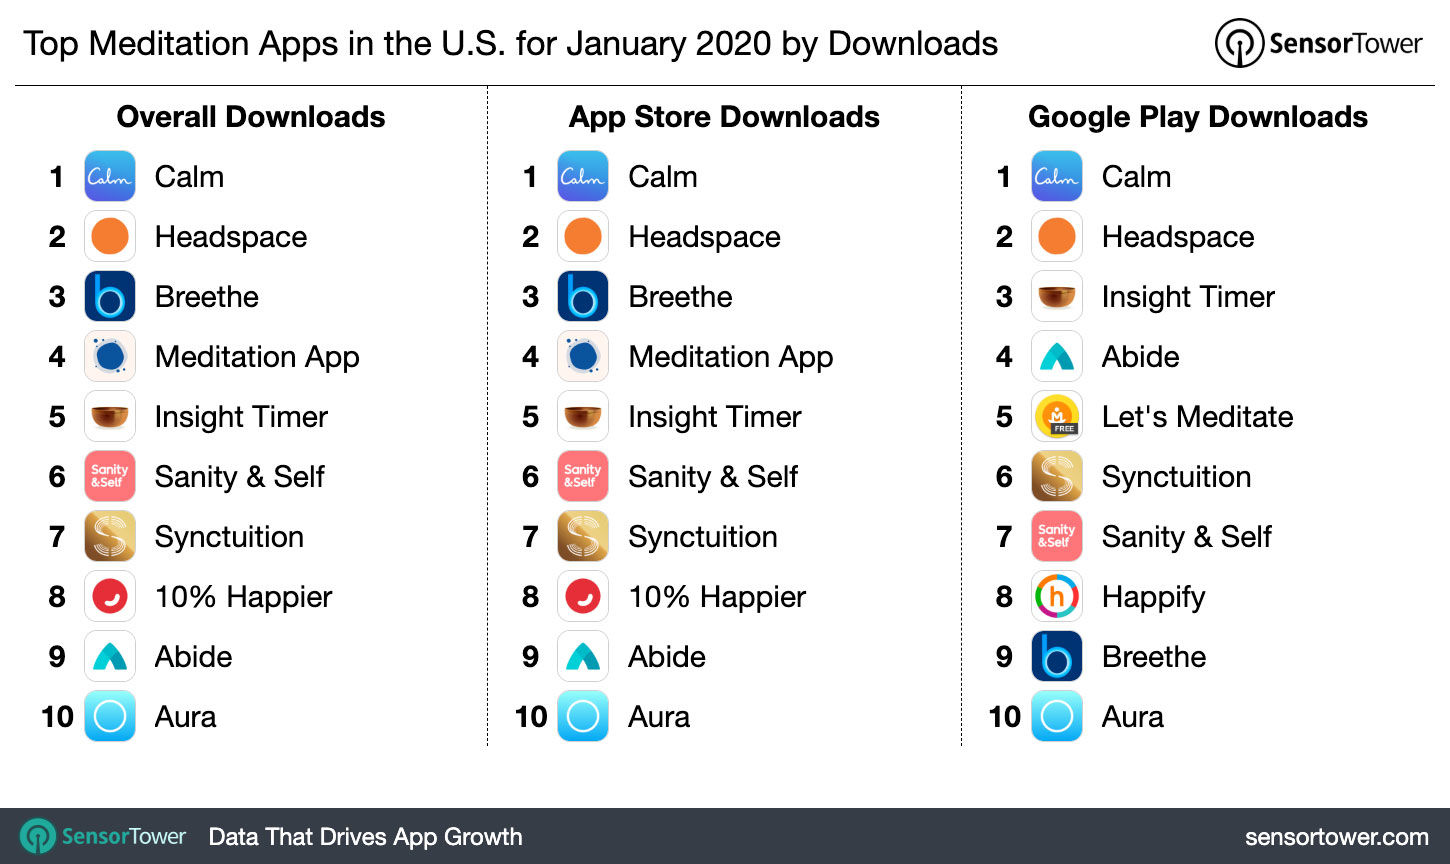 Top Meditation Apps in the United States for January 2020 by Downloads